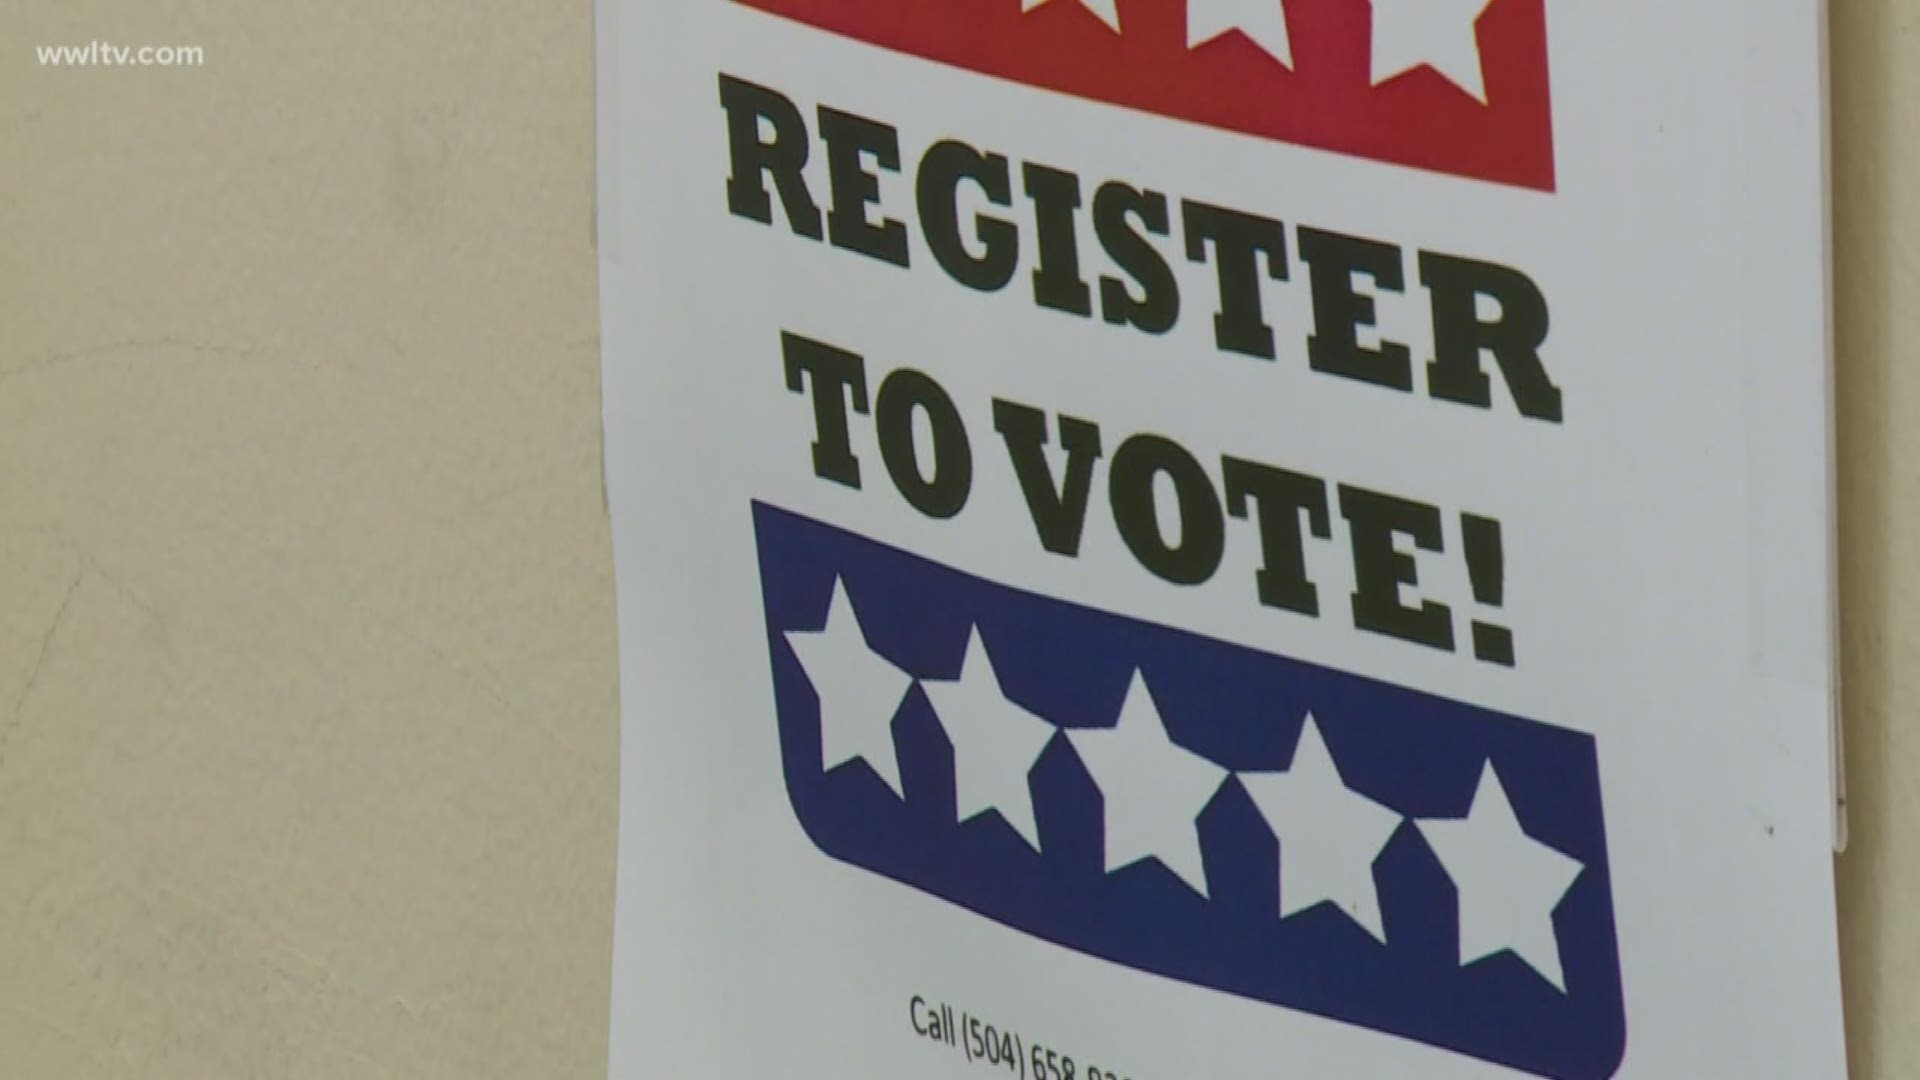 You can still register until 11:59 p.m. Tuesday, Oct. 16.